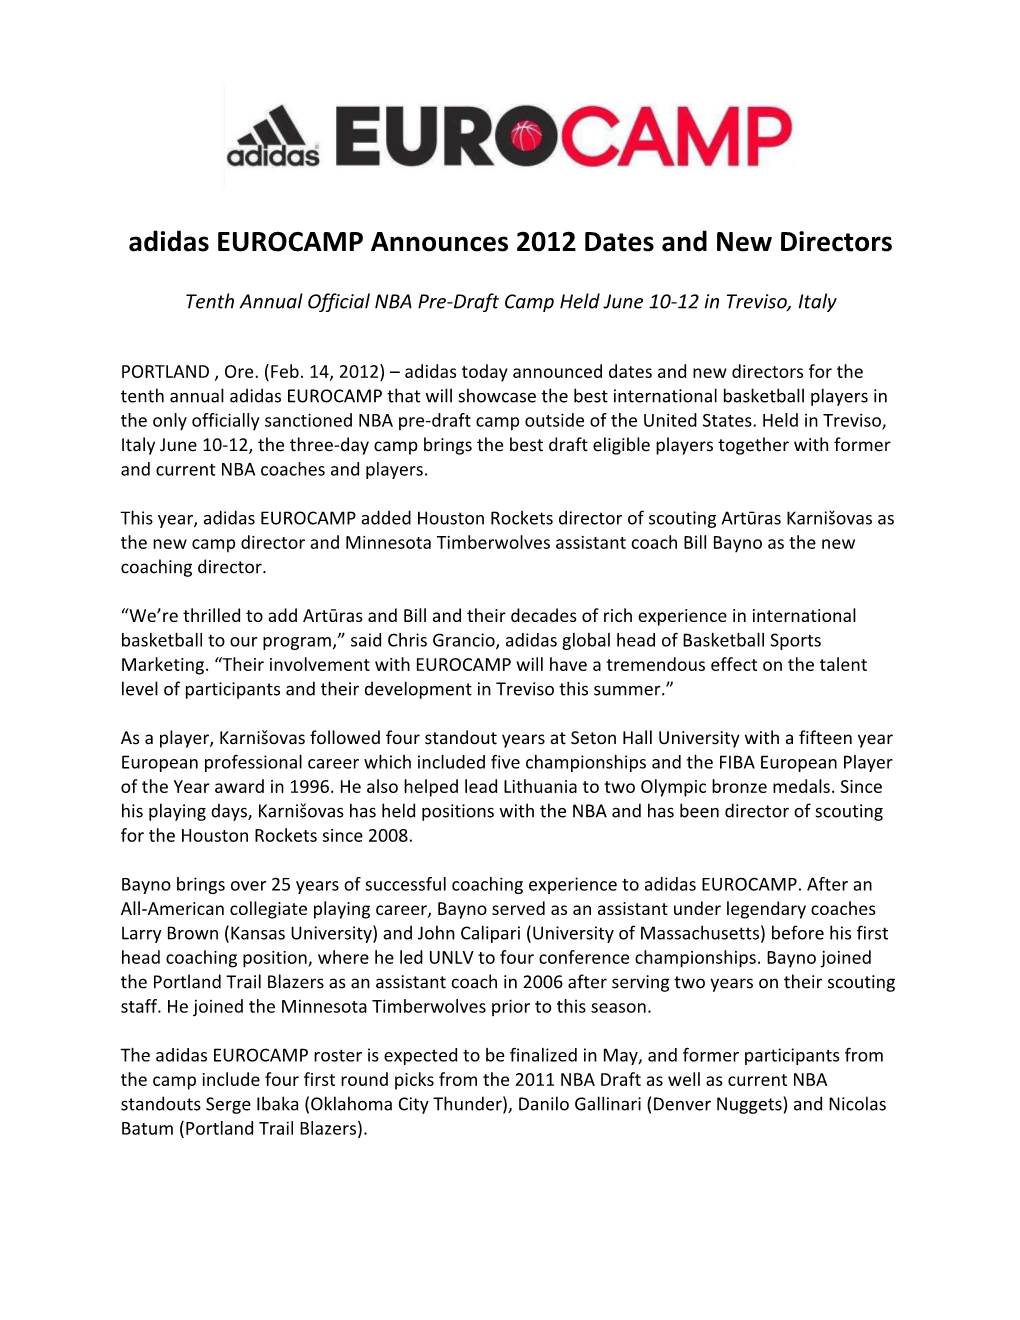 Adidas EUROCAMP Announces 2012 Dates and New Directors